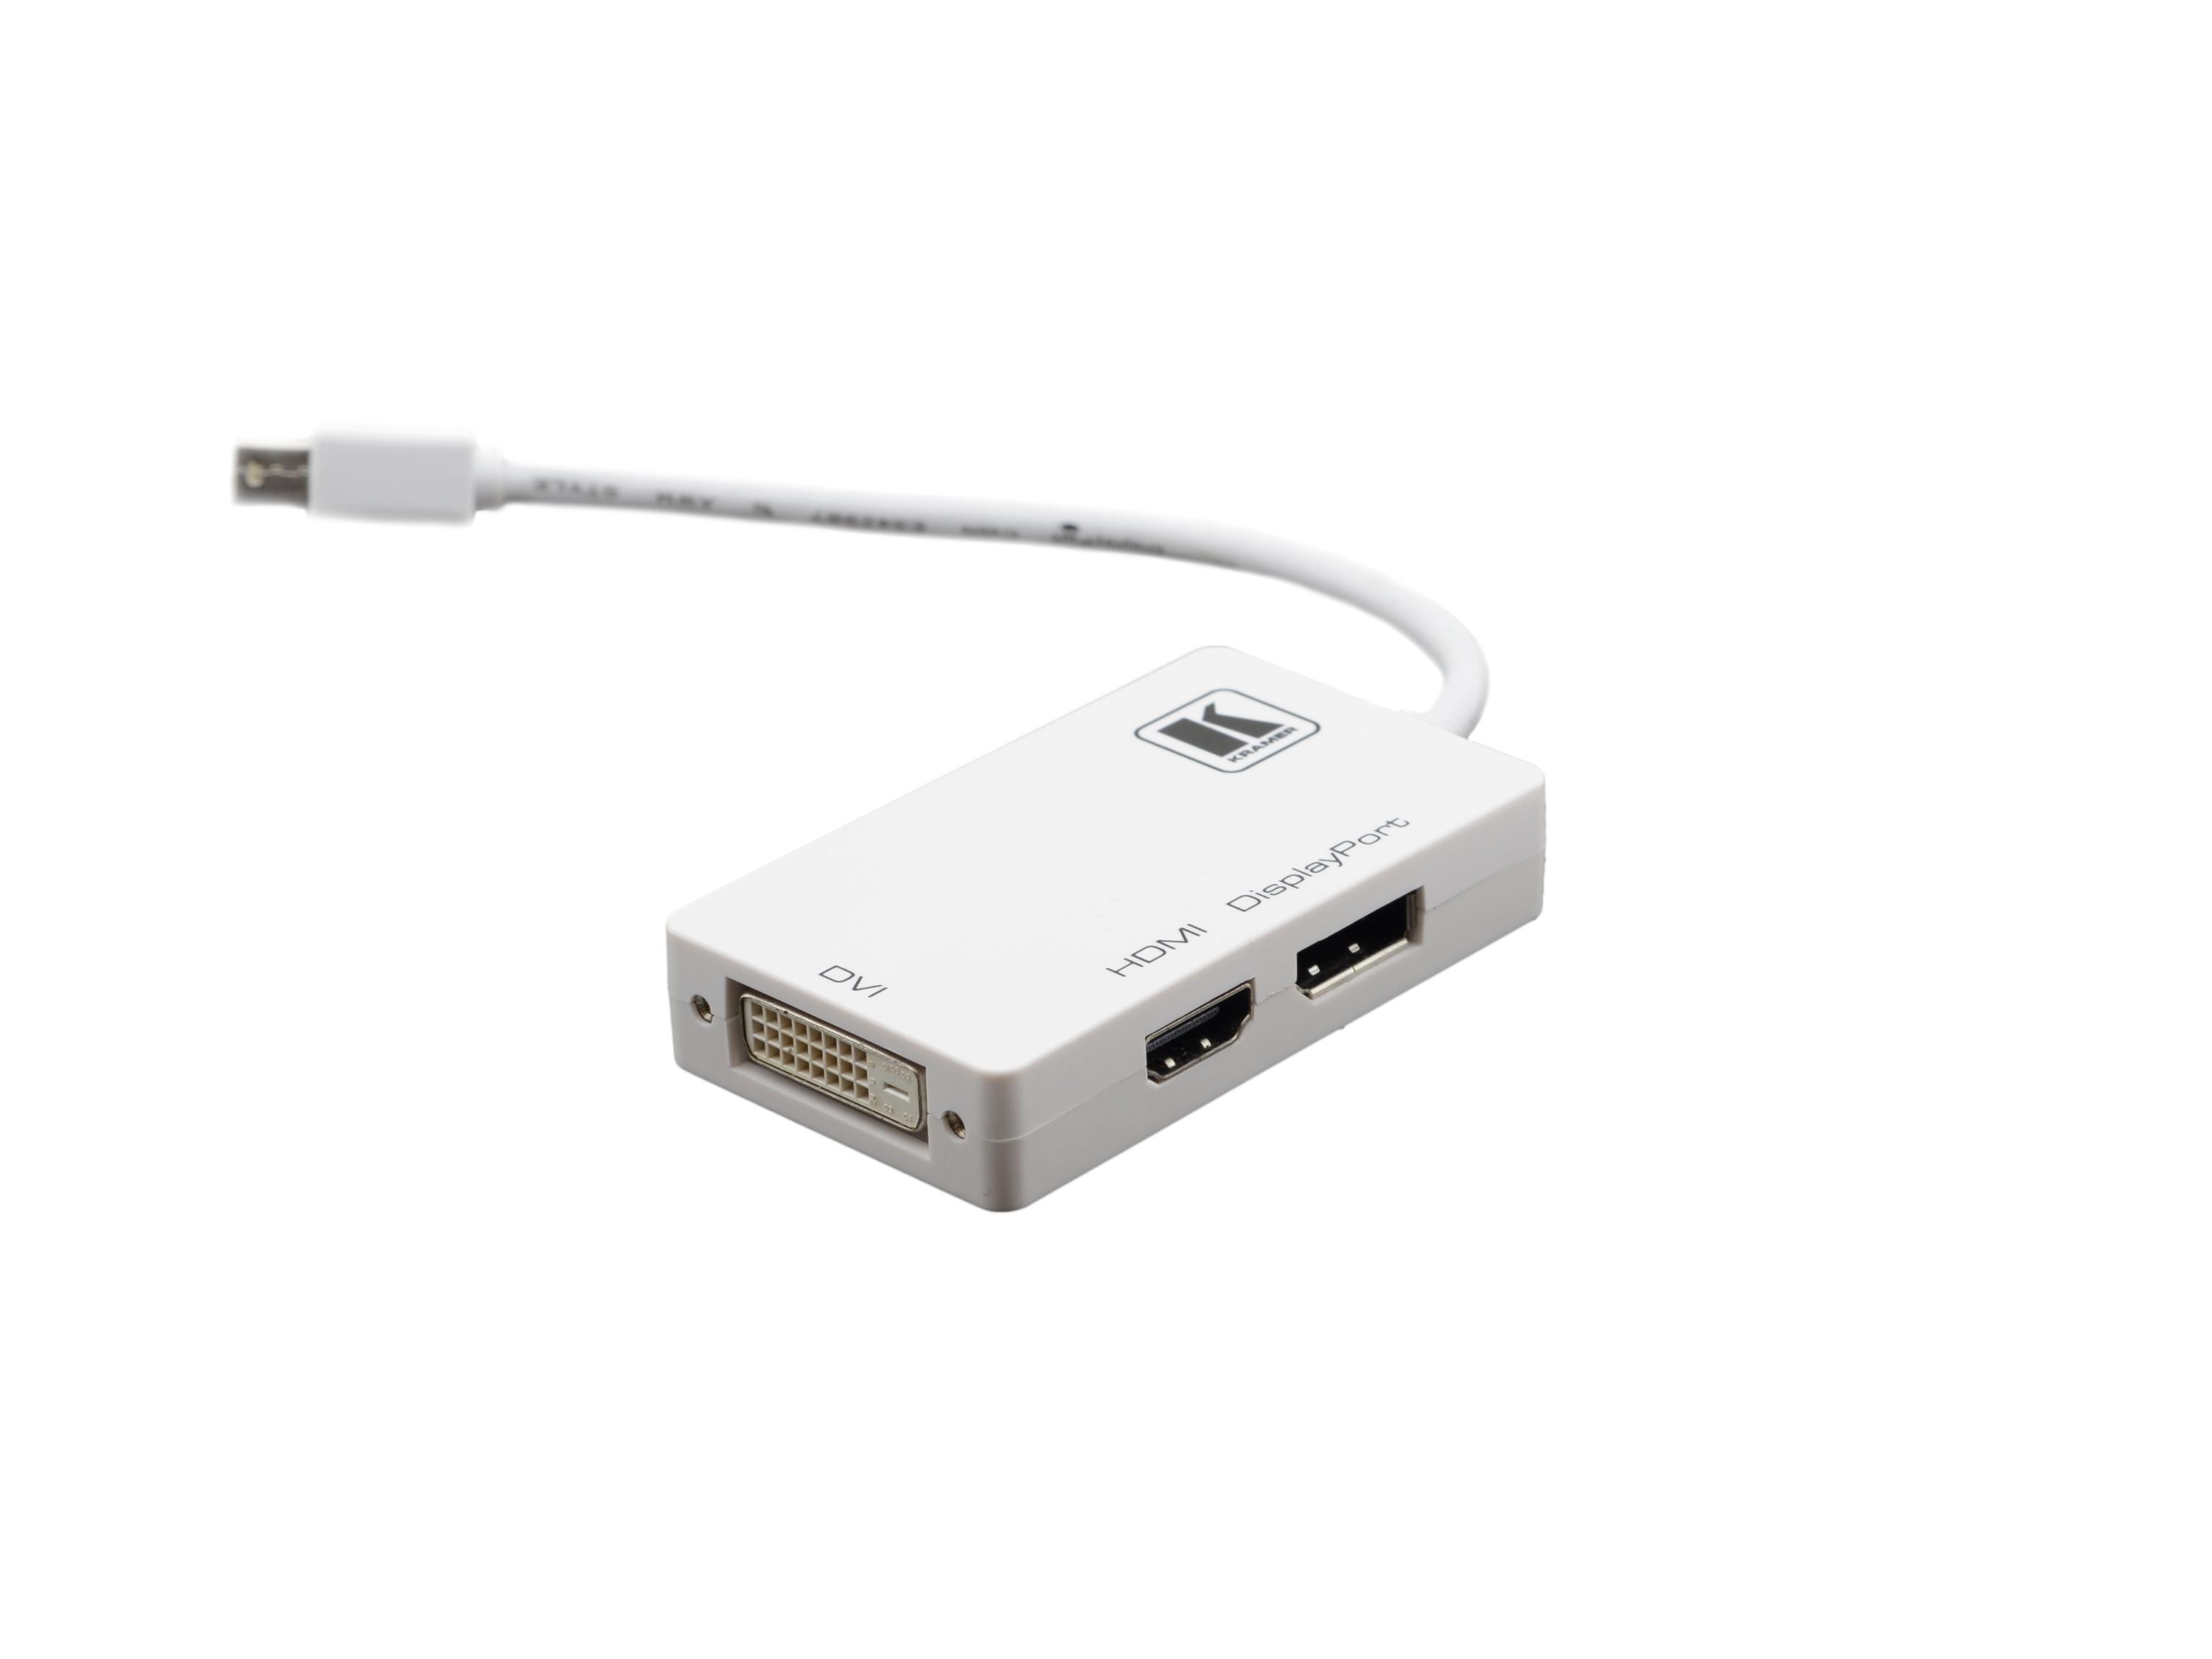 ADC-MDP/M2 Mini DisplayPort to DVI/HDMI or DisplayPort Adapter Cable by Kramer